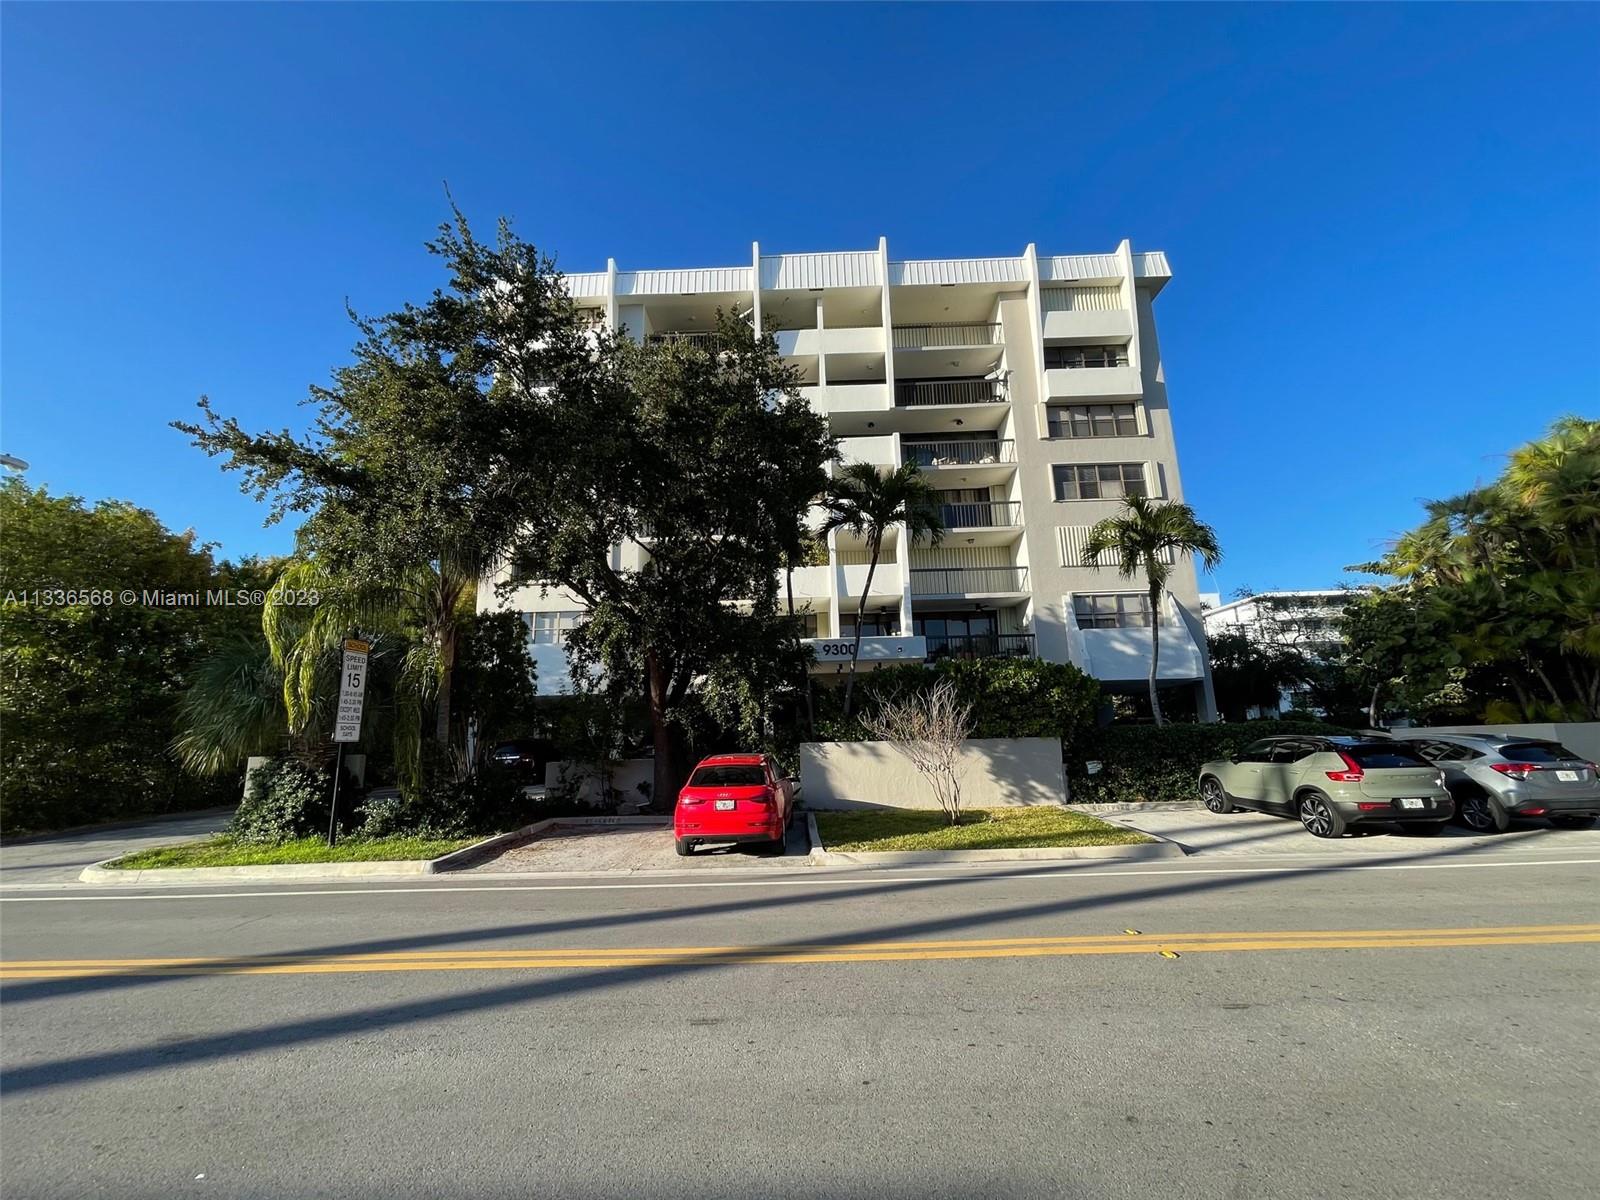 ENORMOUS AND BRIGHT CONDO IN THE PRESTIGIOUS BAY HARBOR ISLANDS, GREAT LAYOUT, 2 BEDROOMS, 2 1/2 BATHS, UPDATED KITCHEN, 2 ASSIGNED PARKING SPACES (1 UNDER COVER), WALK IN CLOSET, LARGE BALCONY, POOL, SECURED BUILDING. FULL SIZE WASHER & DRYER INSIDE UNIT, MARBLE FLOORS, HUGE STORAGE UNIT, BRAND NEW A/C, SECURITY CAMERAS, HURRICANE SHUTTERS, GREAT SCHOOLS, JUST STEPS AWAY FROM SPECTACULAR BEACHES, RESTAURANTS & THE FAMED BAL HARBOUR SHOPS.